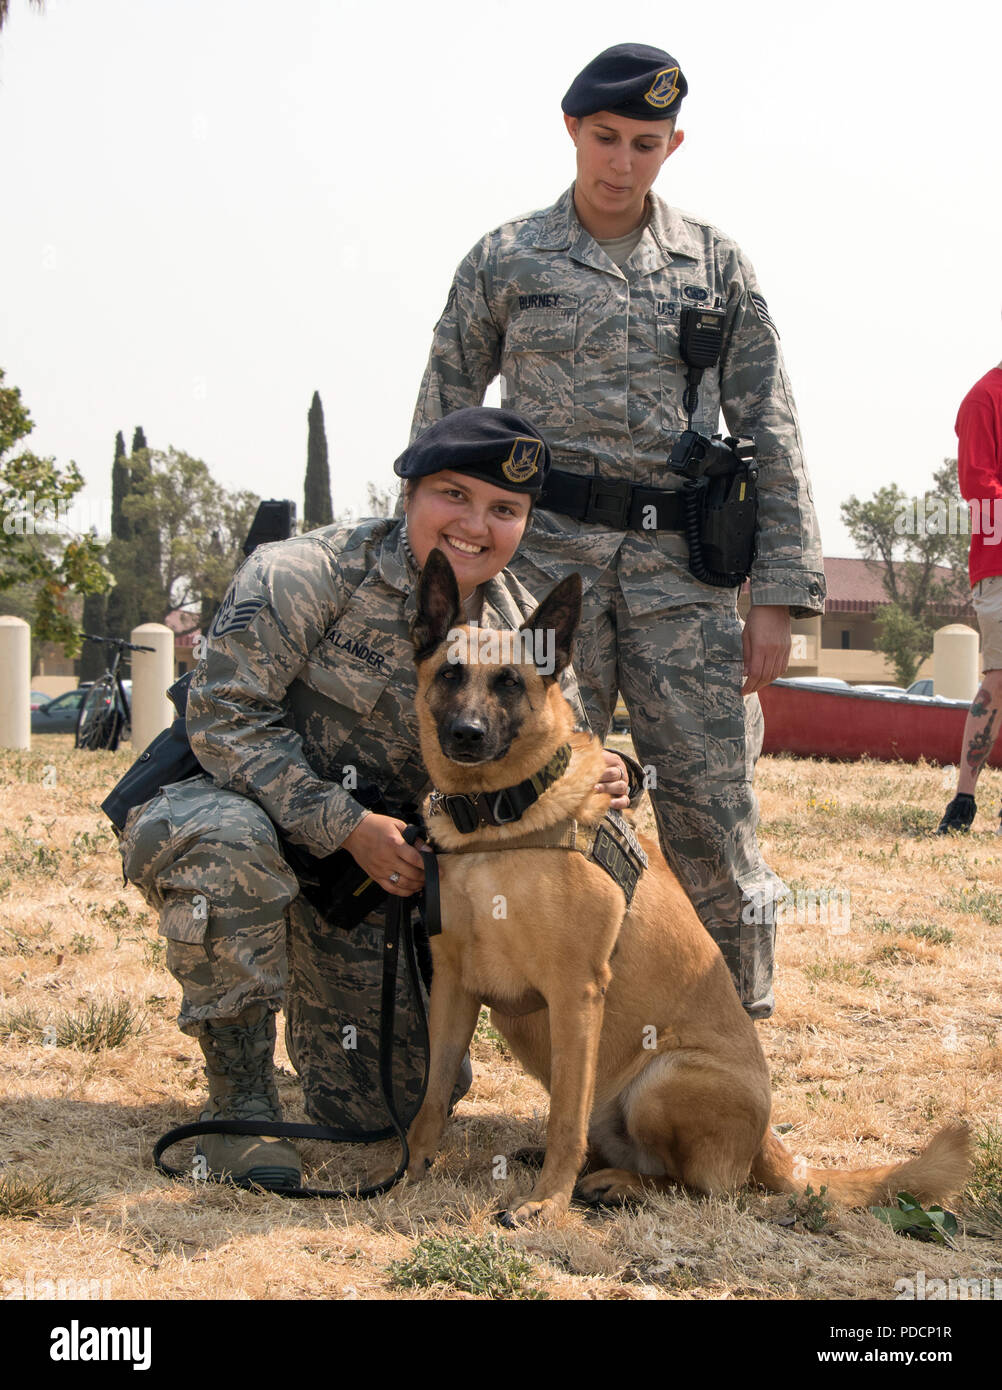 U.S. Air Force Staff Sgt. Miranda Kalander, SSgt Deveraux Burney and military working dog BBravo, all from the 60th Security Forces pause for a photo while attending the Rock the Block Festival at Travis Air Force Base, Calif., August 3, 2018. Patrons were treated to a variety of activities to include Mobility from the U.S. Band of the Golden West, carnival rides, games, kid’s fun zone, free food, and food trucks. (U.S. Air Force photo by Heide Couch) Stock Photo